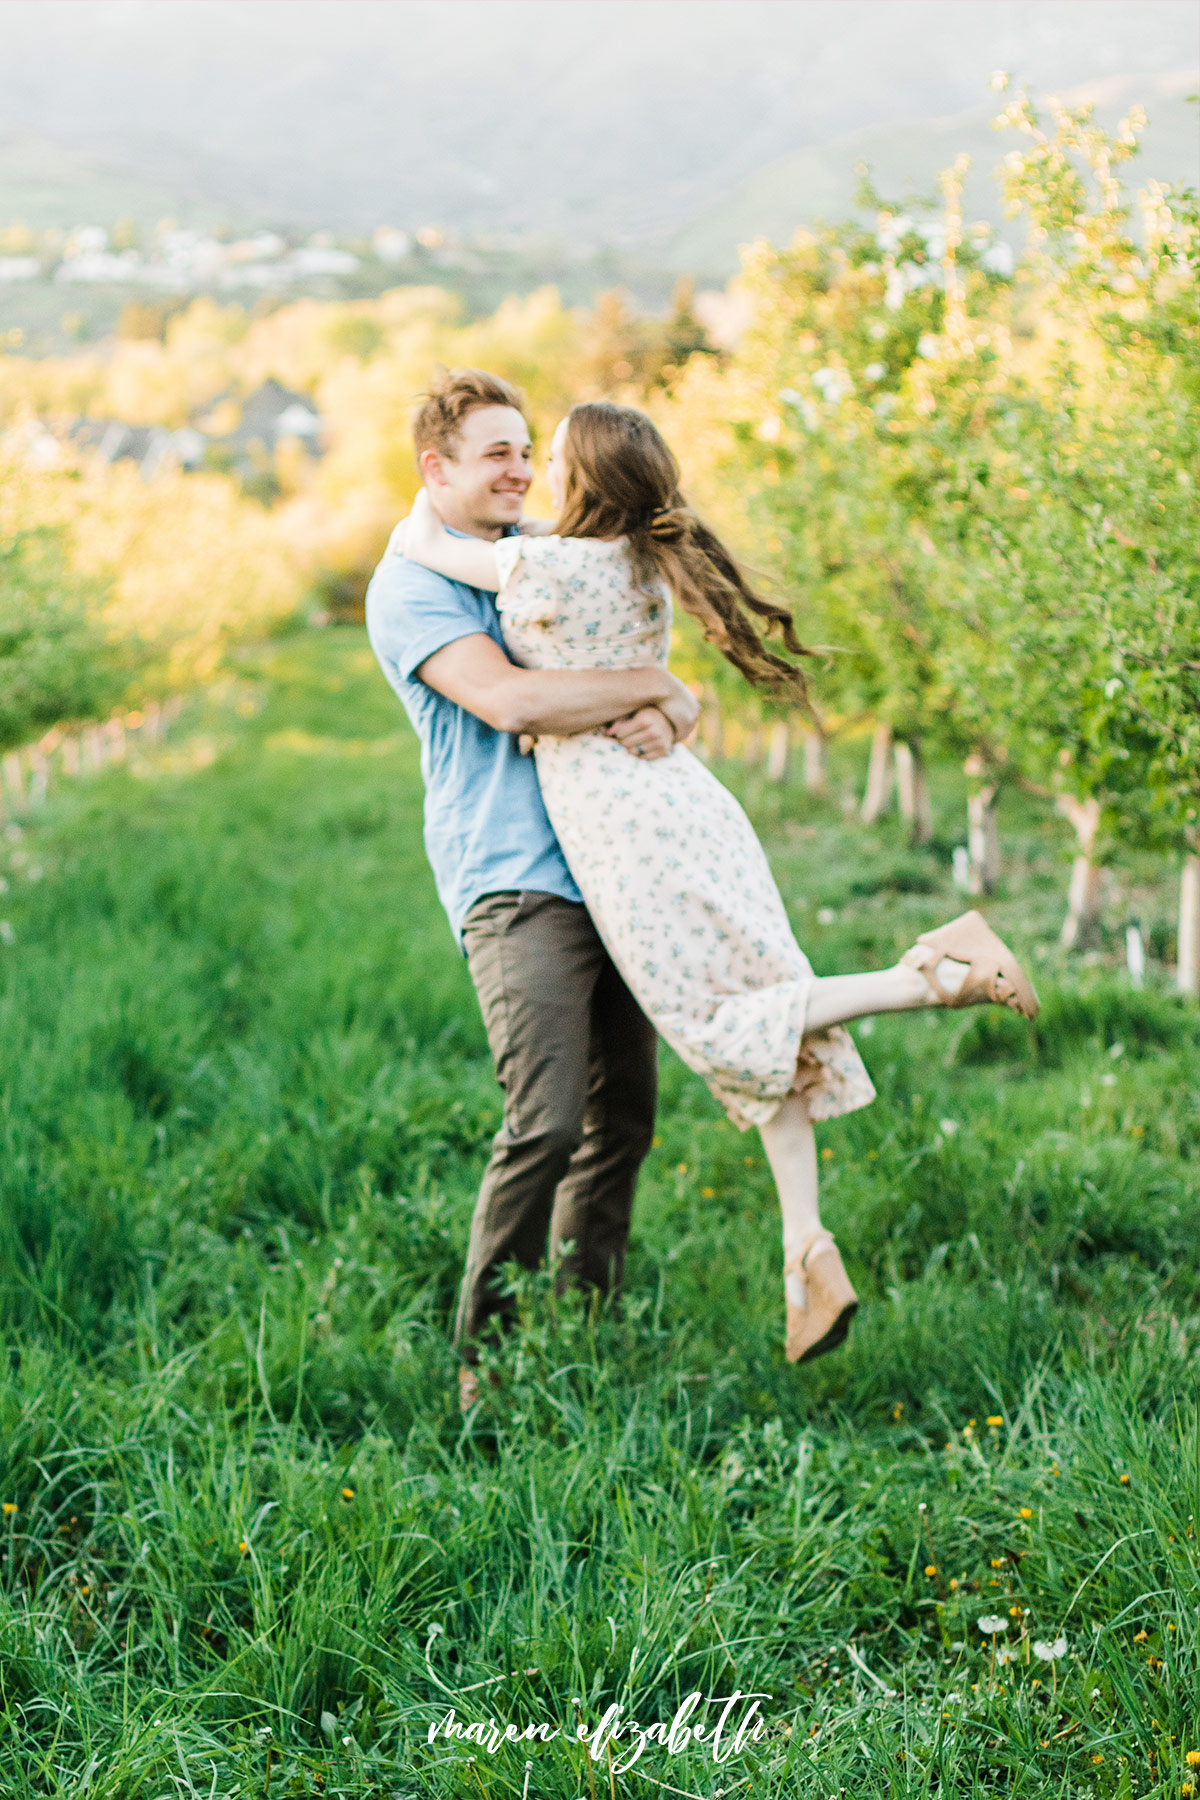 Spring engagement pictures at Burgess Orchards in Alpine, UT with a perfect view of the mountains. | Maren Elizabeth Photography